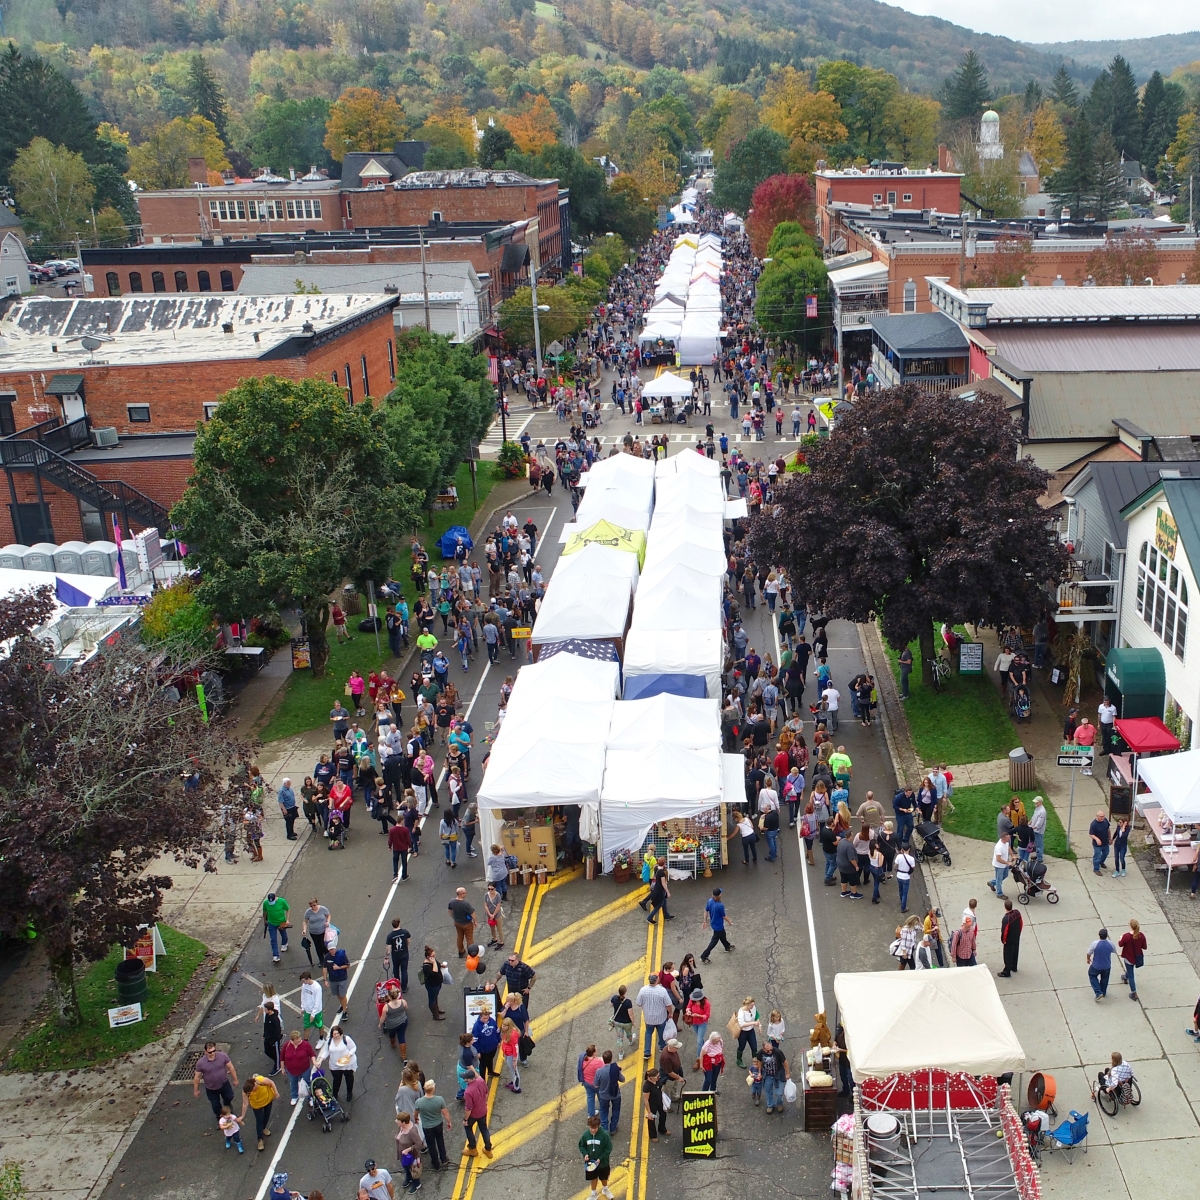 Aerial view looking West from the East side of Ellicottville during Ellicottville's Fall Festival (2018)